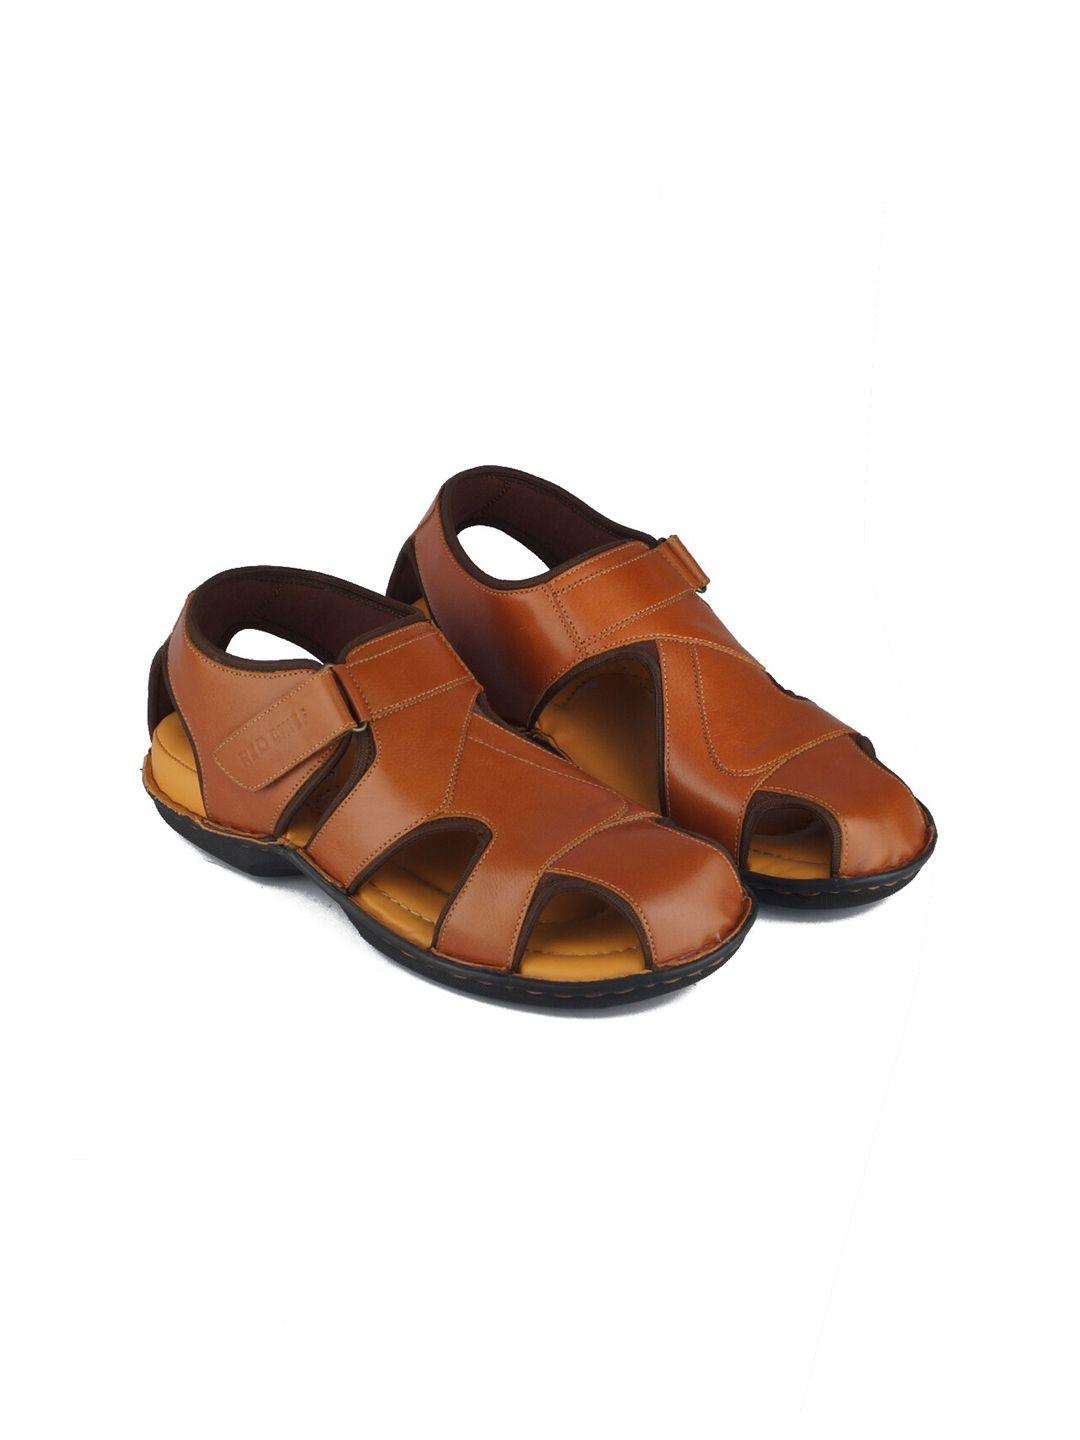 red-chief-men-brown-leather-comfort-sandals